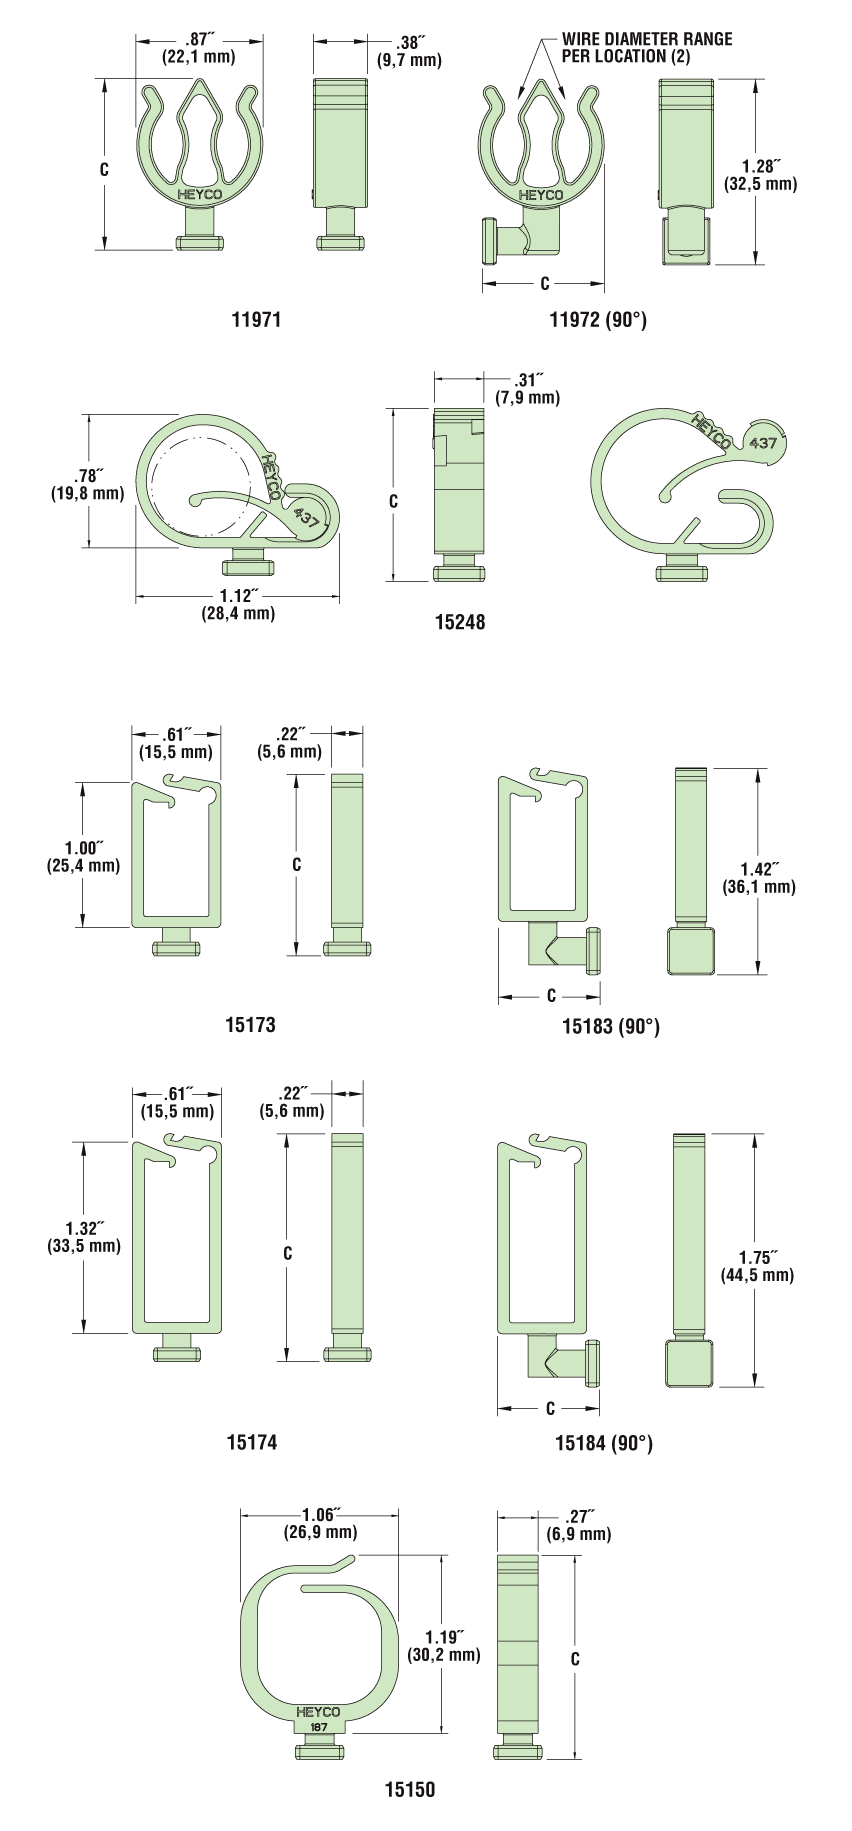 Heyco® Modular Wire Routing Devices Diagram